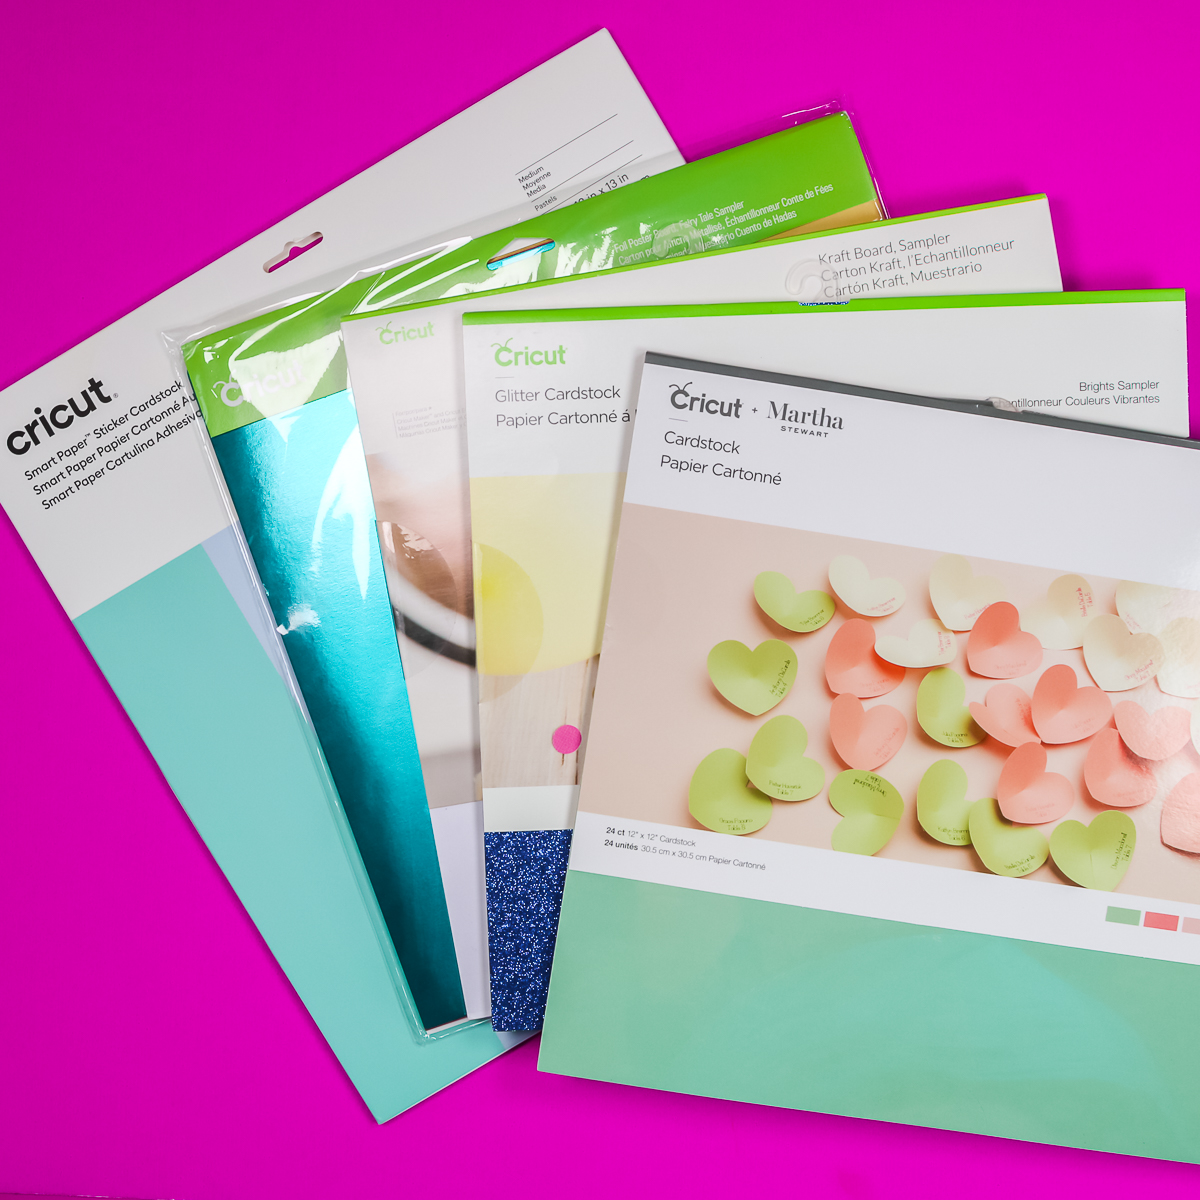 Cricut cardstock options in packaging.